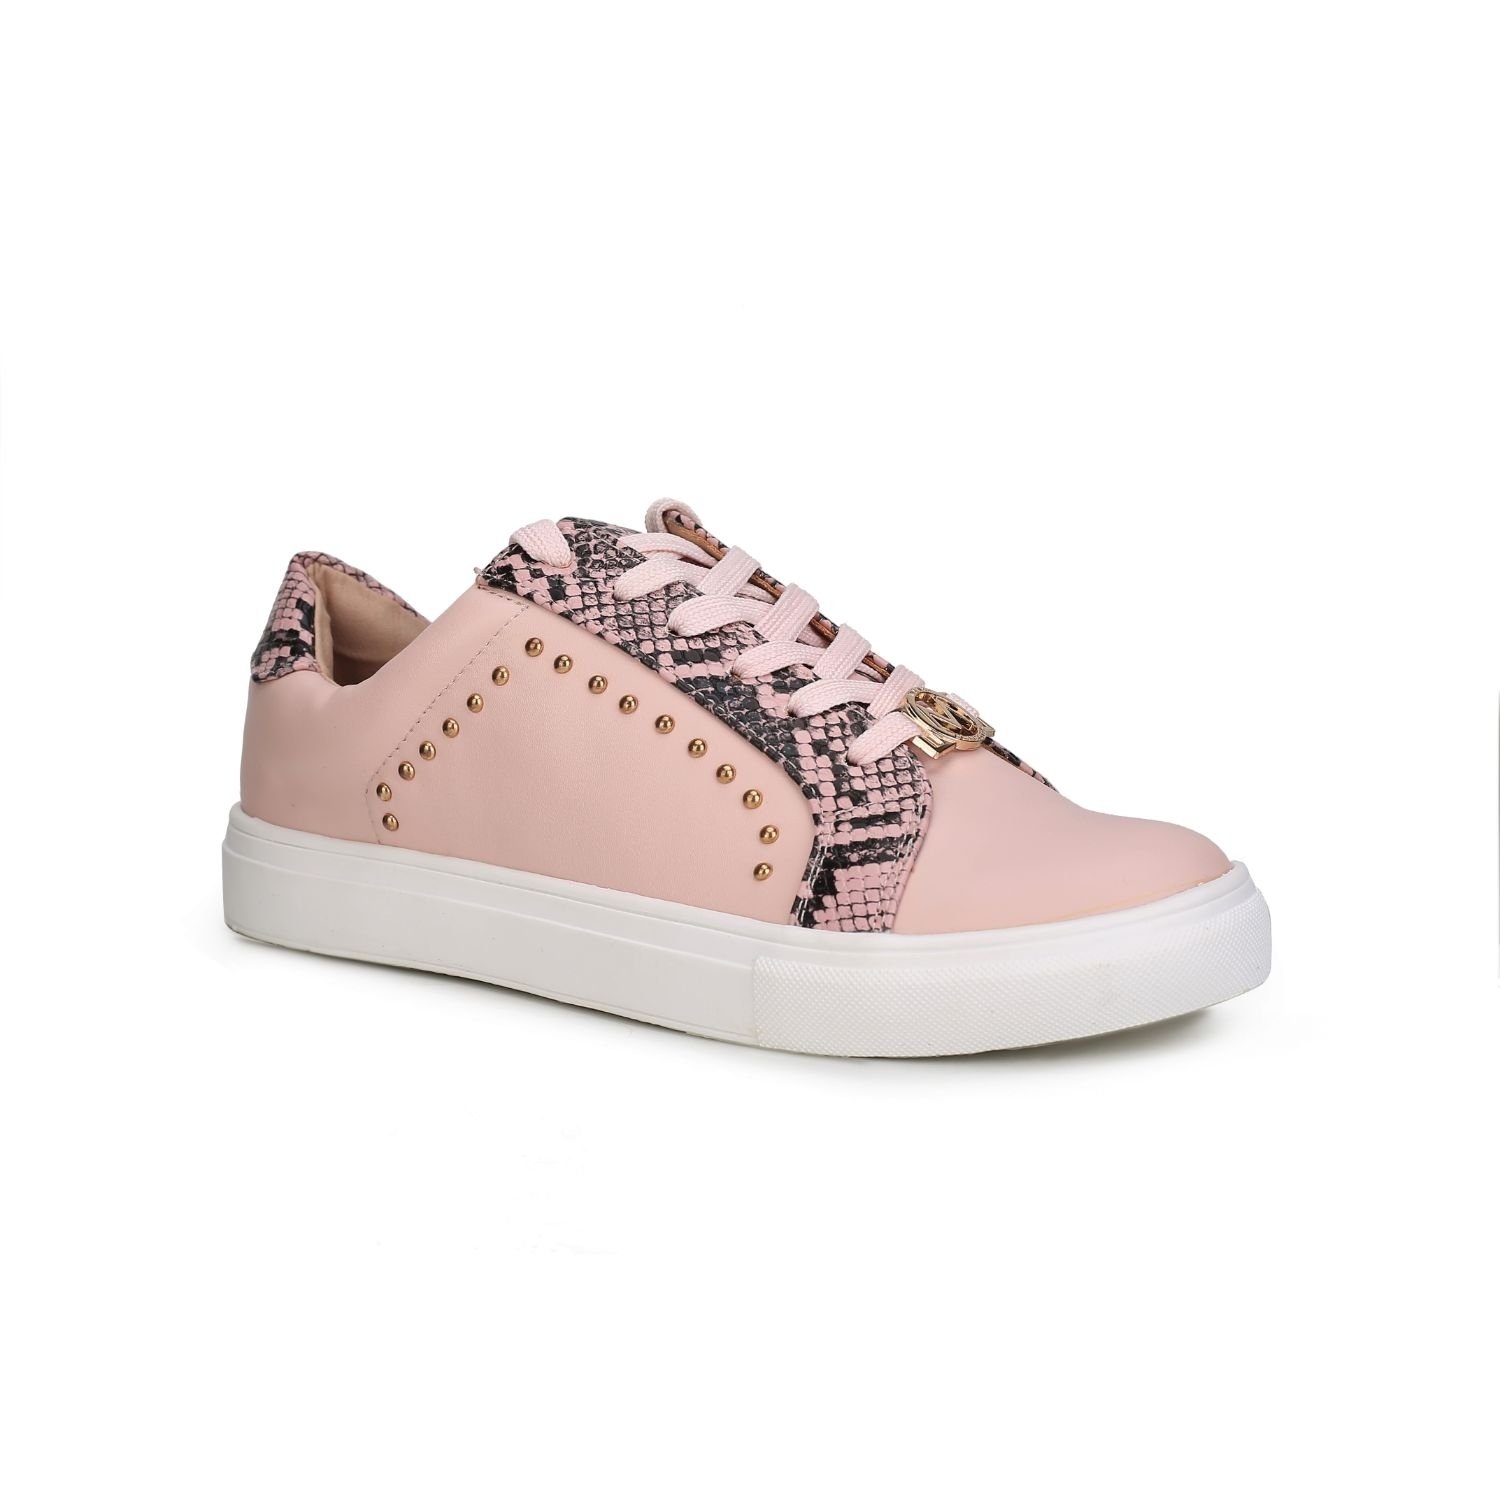 MKF Collection Tamara Snake Tennis Shoes For Women With Adjustable Laces By Mia K - Blush-8.5